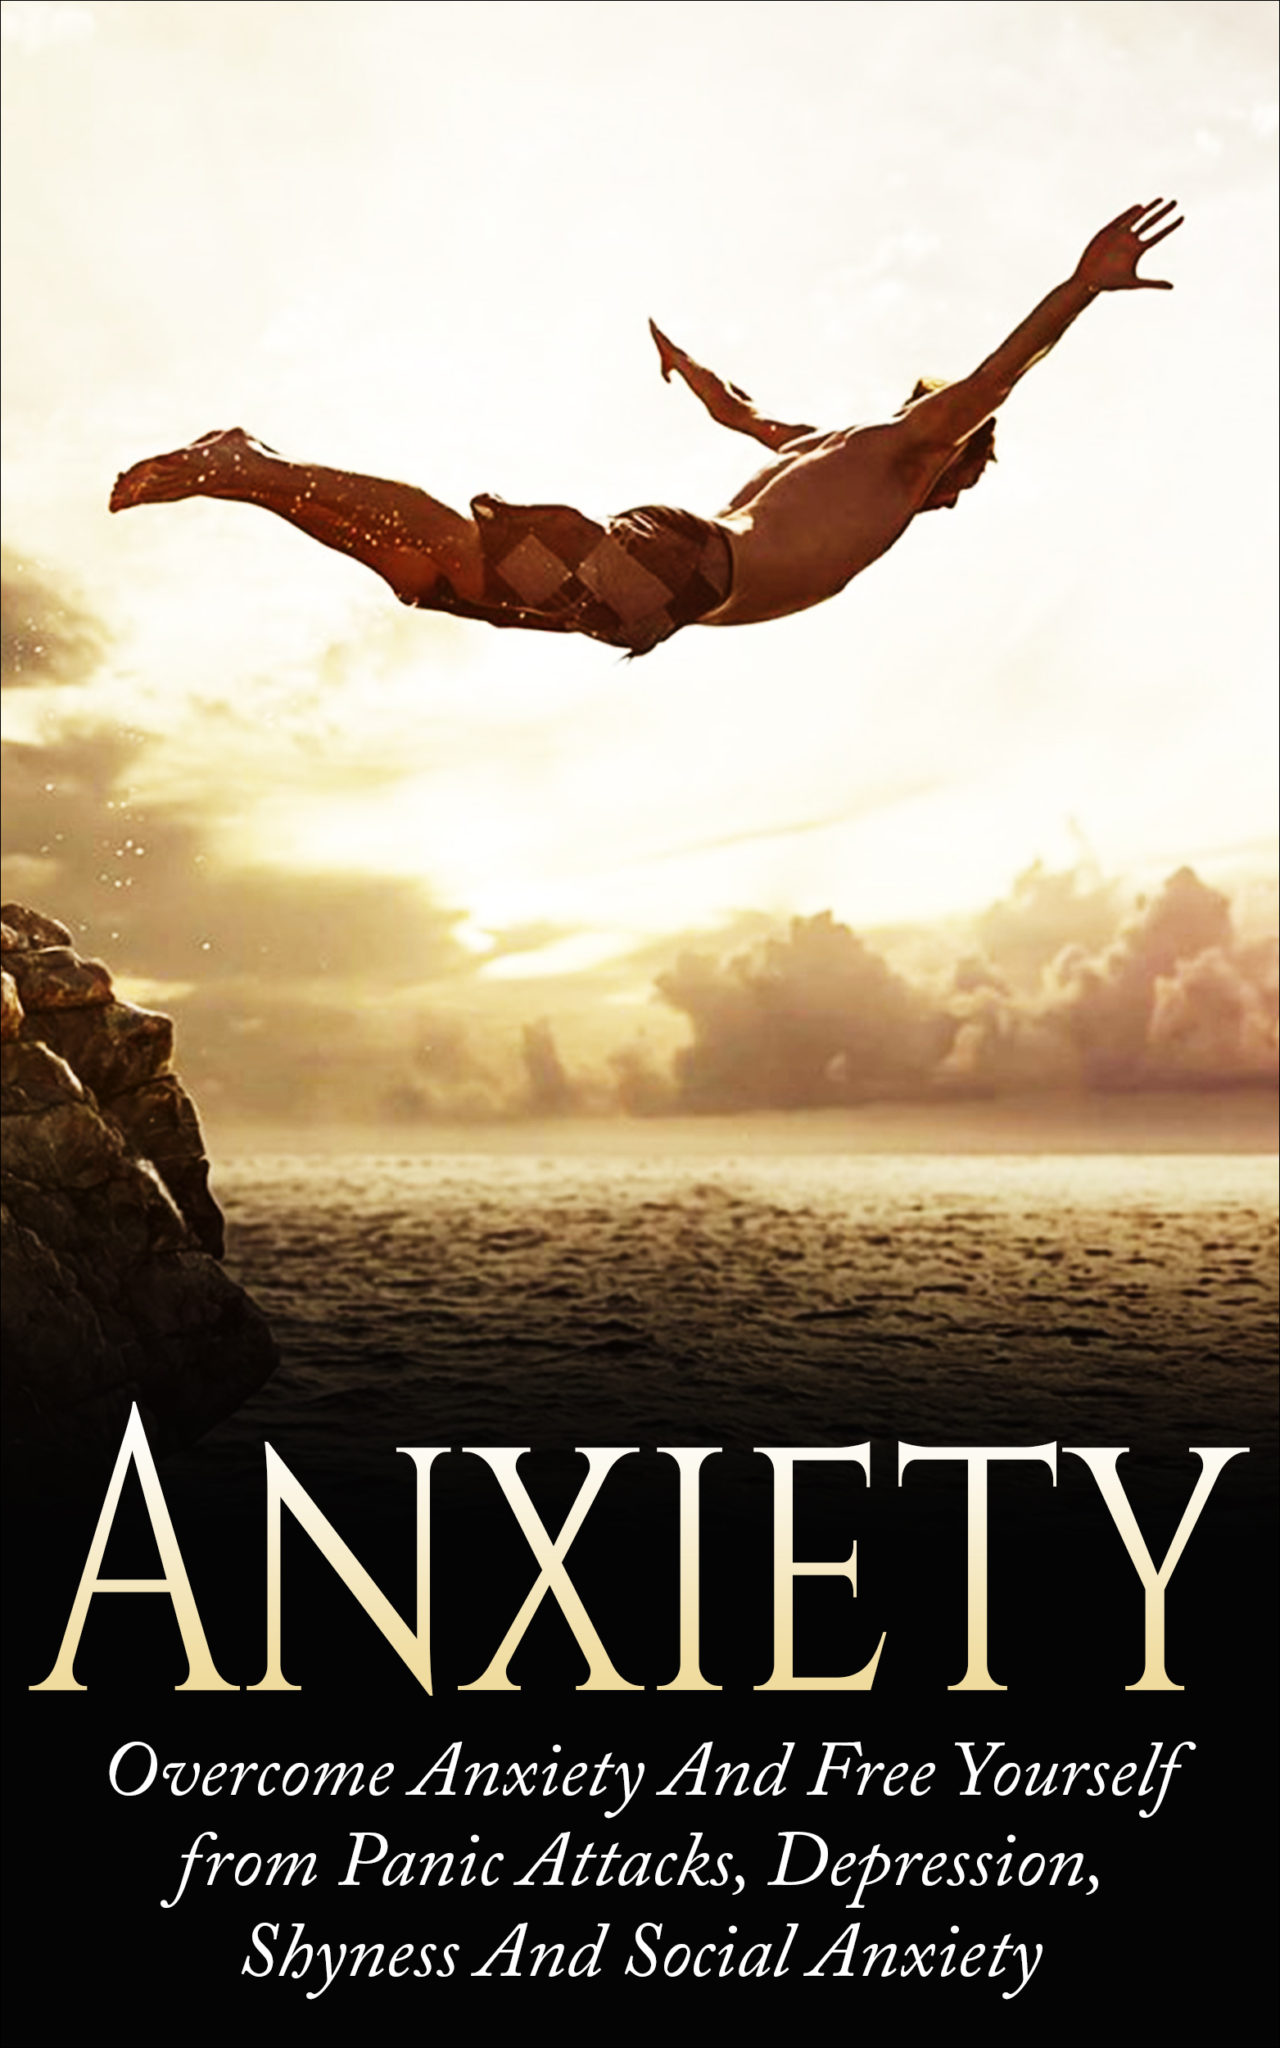 FREE: Anxiety: Overcome Anxiety and Free Yourself from Panic Attacks, Depression, Shyness and Social Anxiety by Jack J. Scott